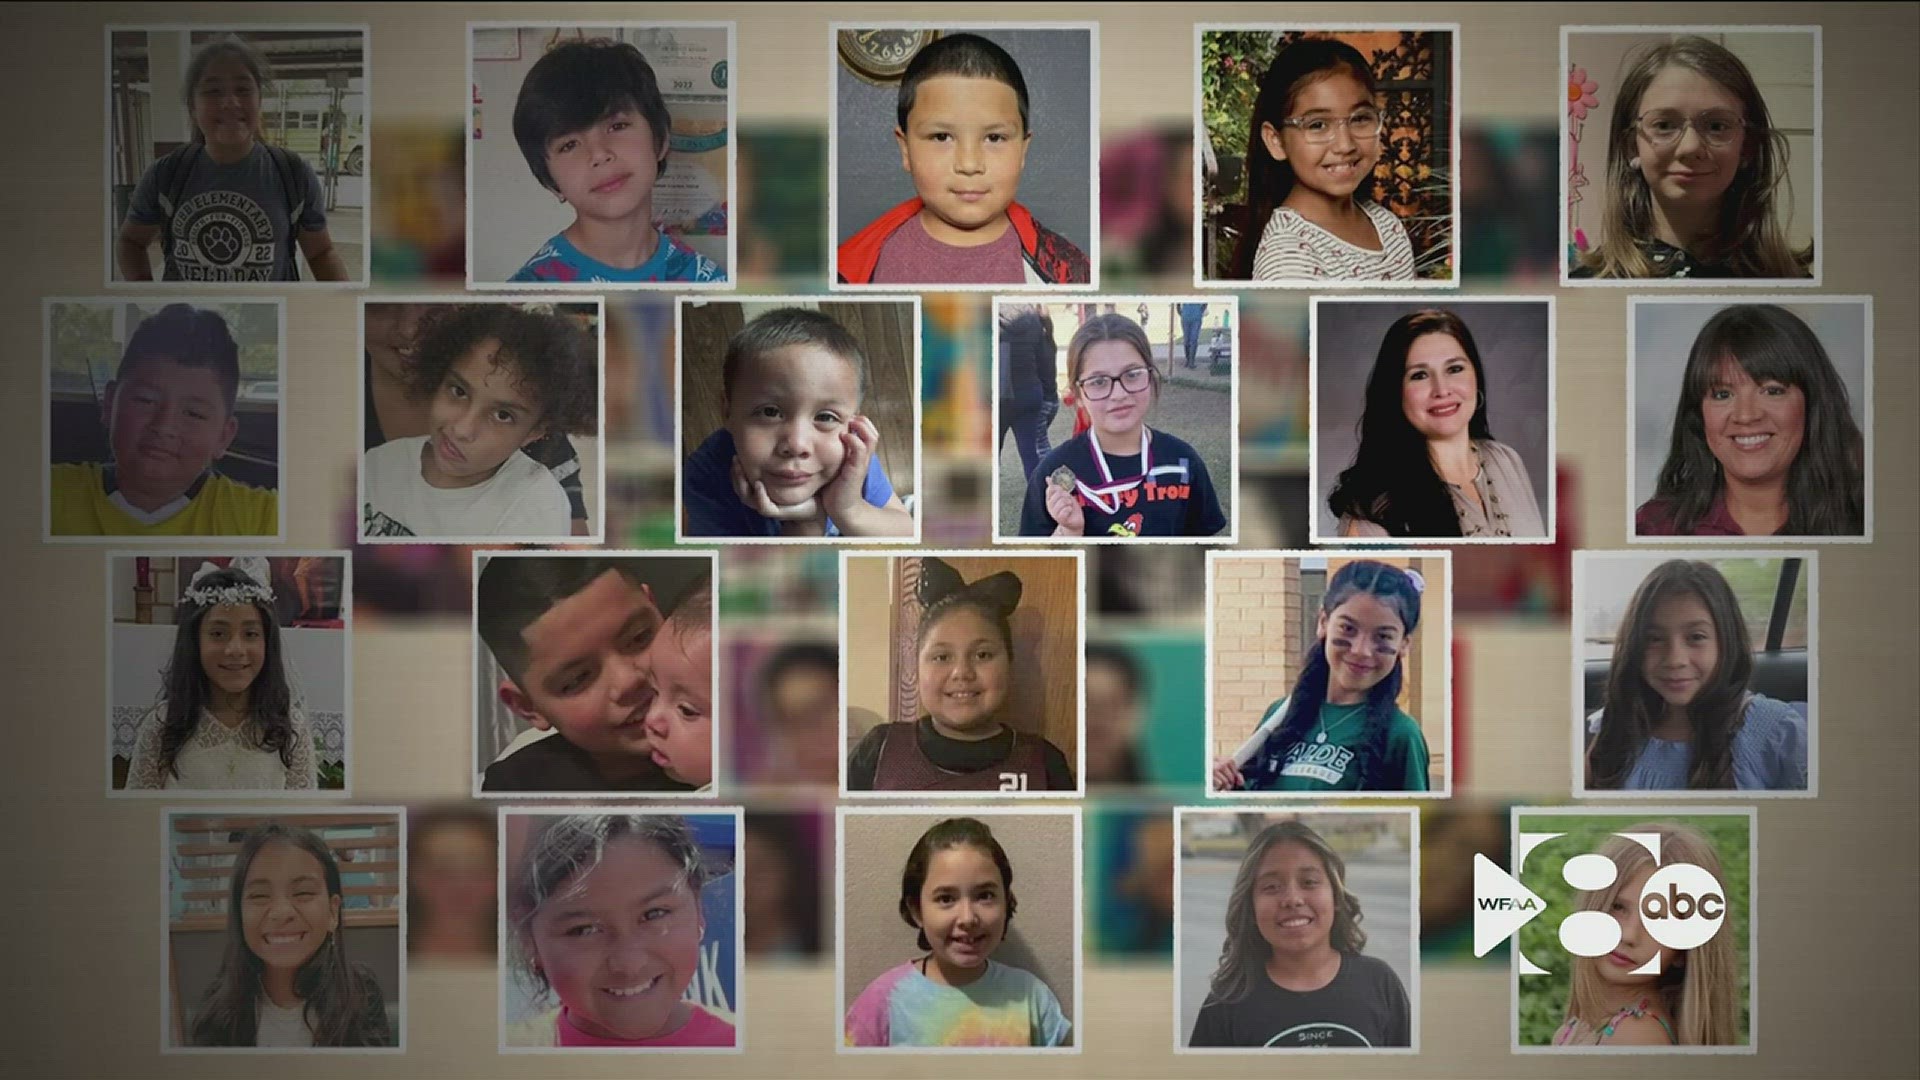 Nineteen students and two teachers were killed on May 24, 2022, in Uvalde, Texas.